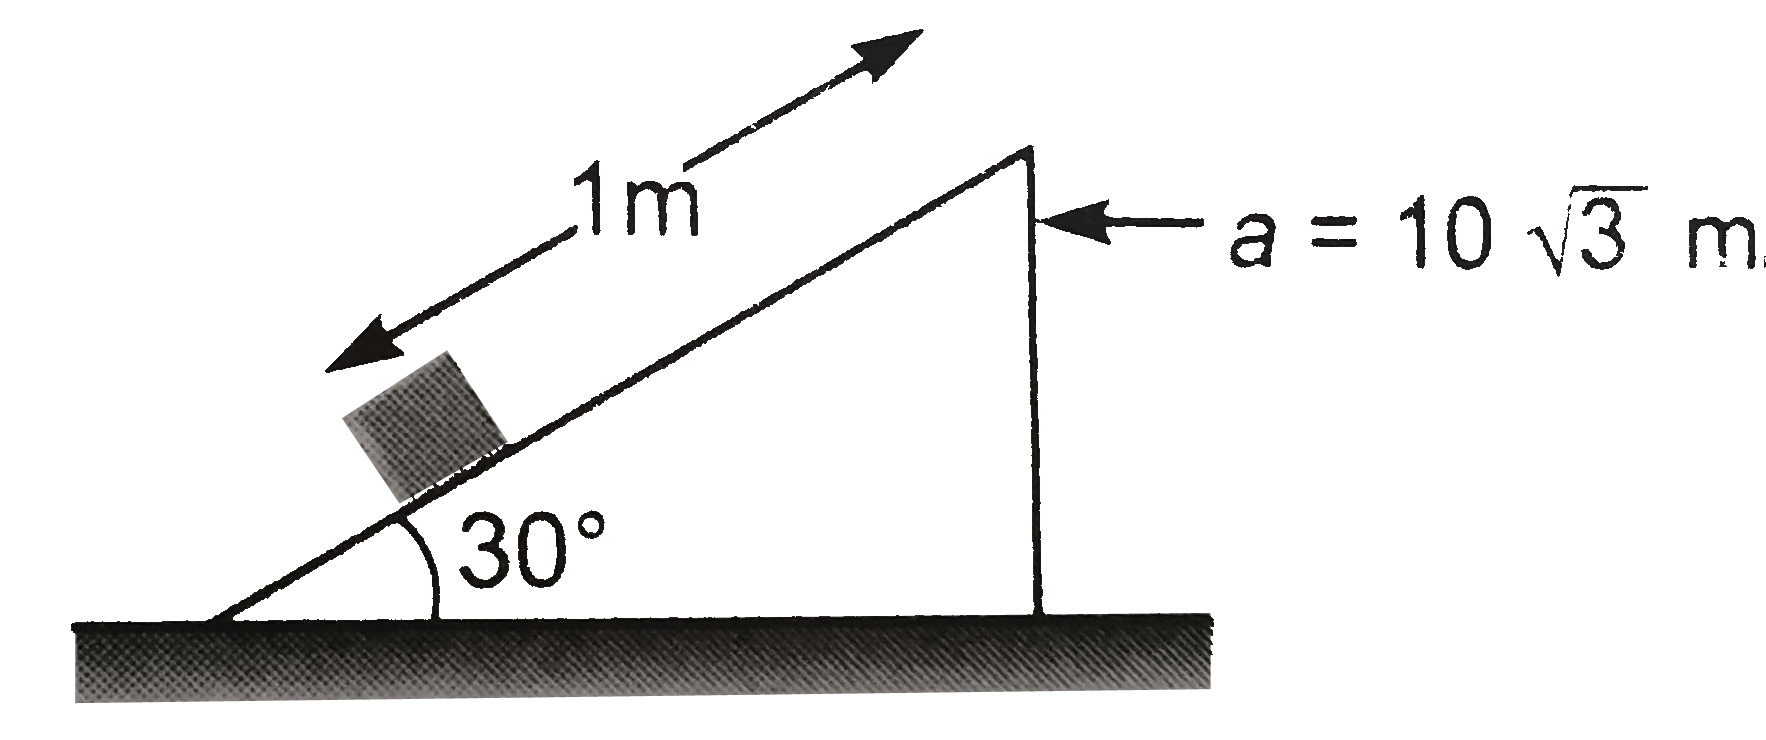 In the figure the wedge is pushed with an acceleration of sqrt3 m//s ^(2). It is seen that the block start climbing up on the smooth inclined face of wedge . What will be the time taken by the block to reach the top?